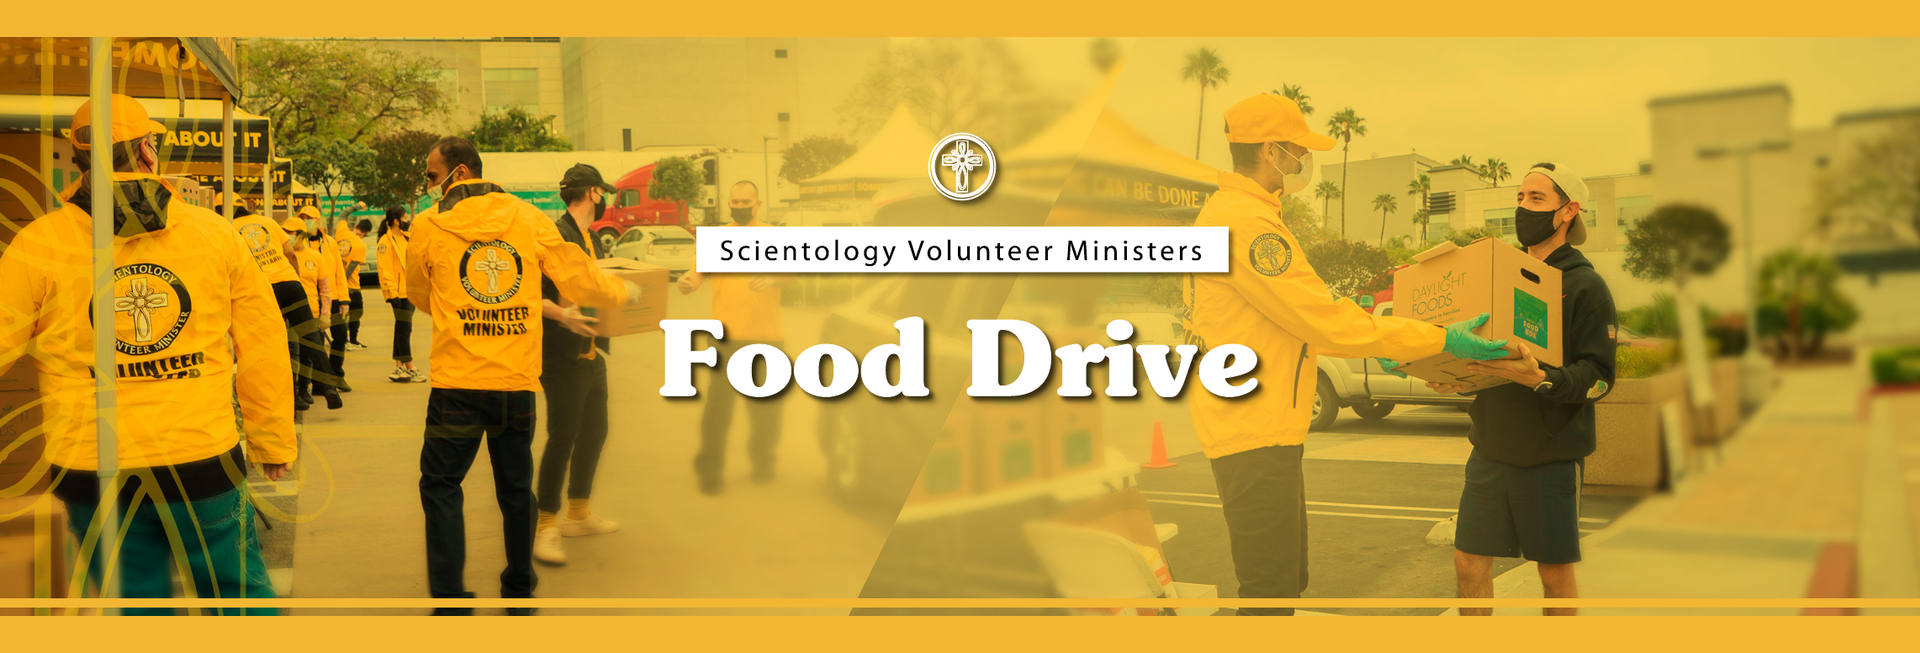 Scientology Volunteer Ministers Food Drive, Los Angeles, California, United States